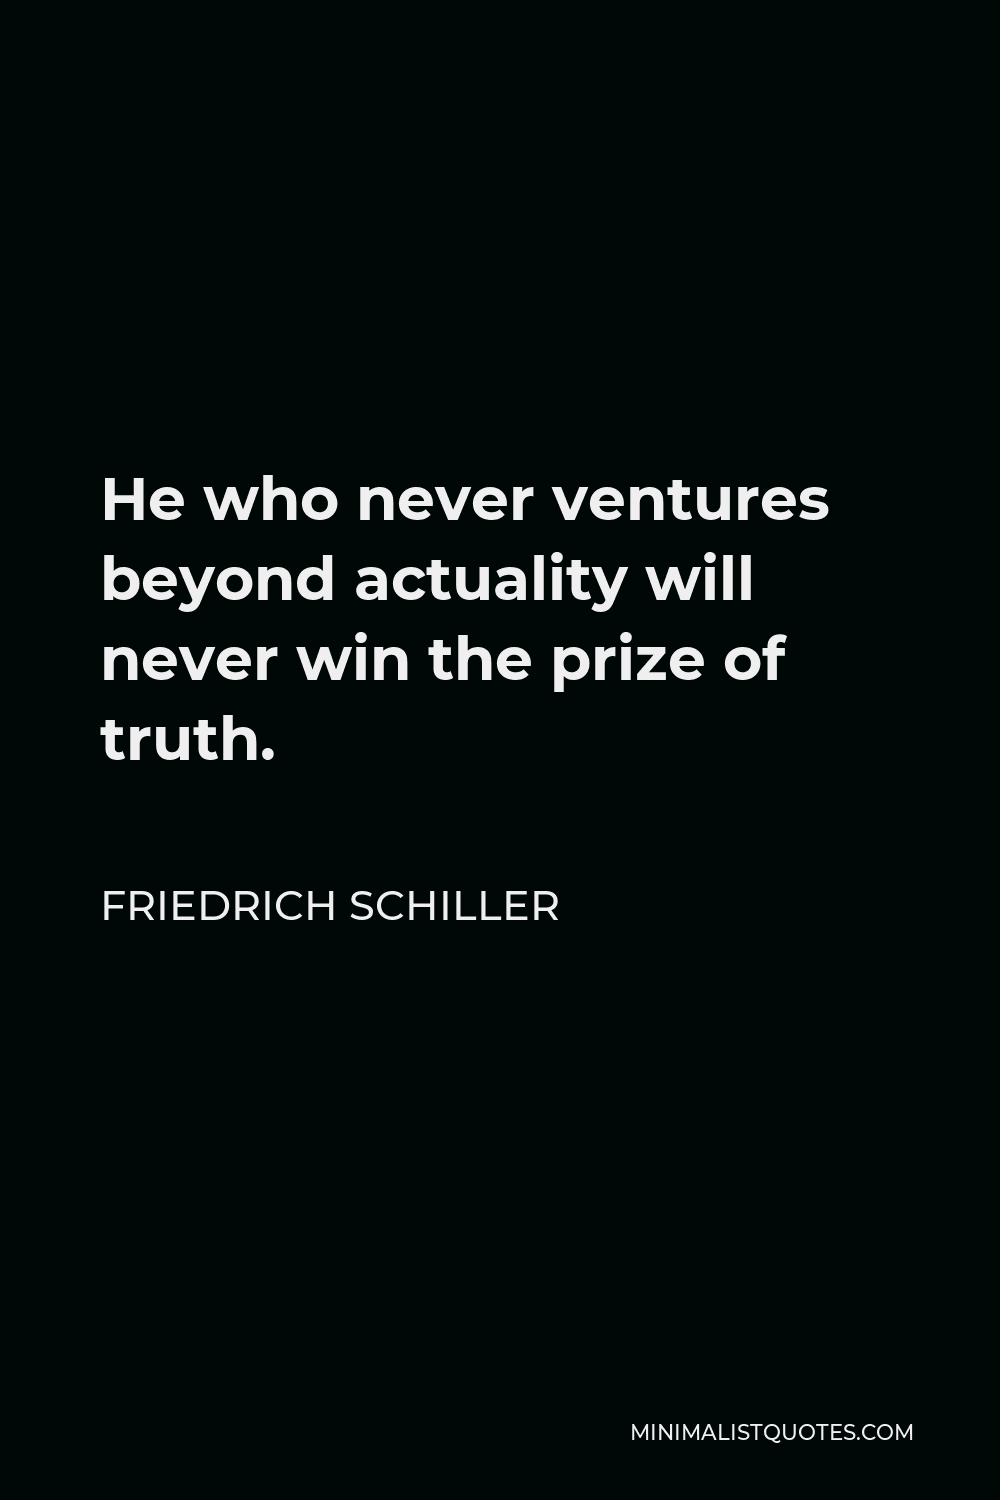 Friedrich Schiller Quote - He who never ventures beyond actuality will never win the prize of truth.